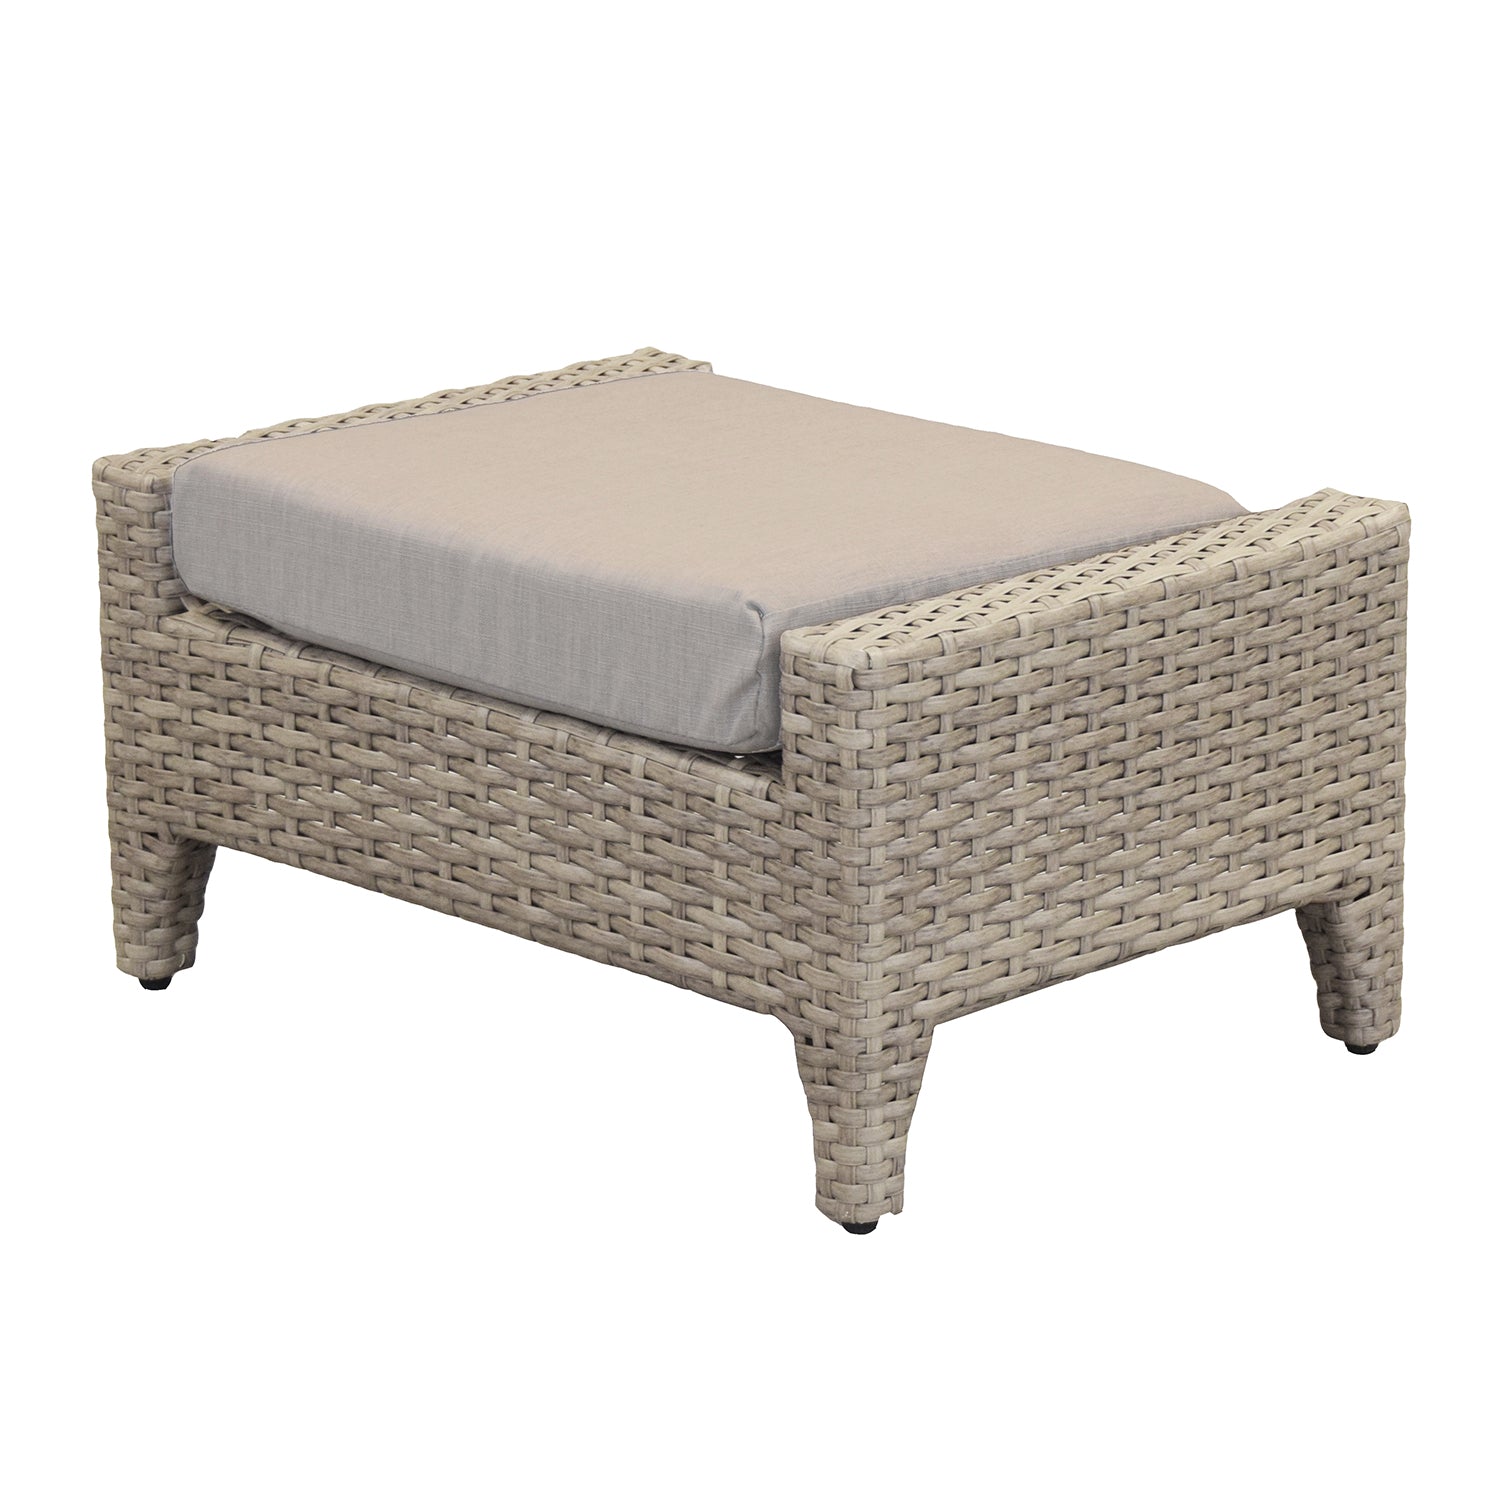 Forever Patio Grand Stafford Rectangular Ottoman by NorthCape International